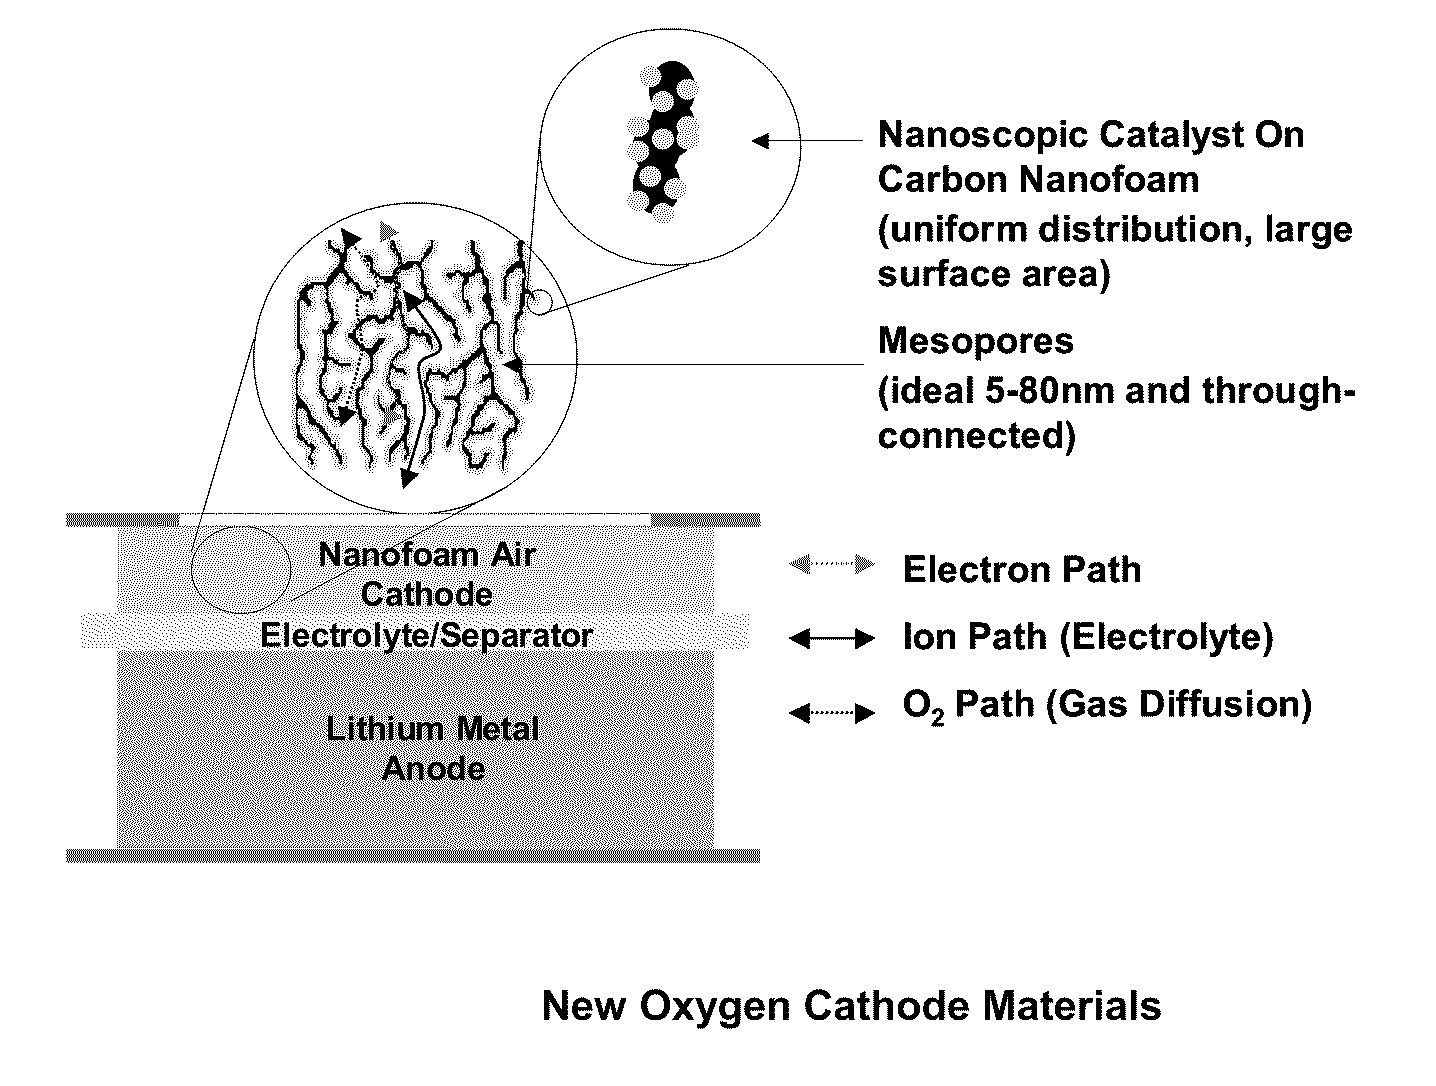 Multifunctional material comprising a highly porous carbon structure with nanoscale mixed metal oxide deposits for catalysis